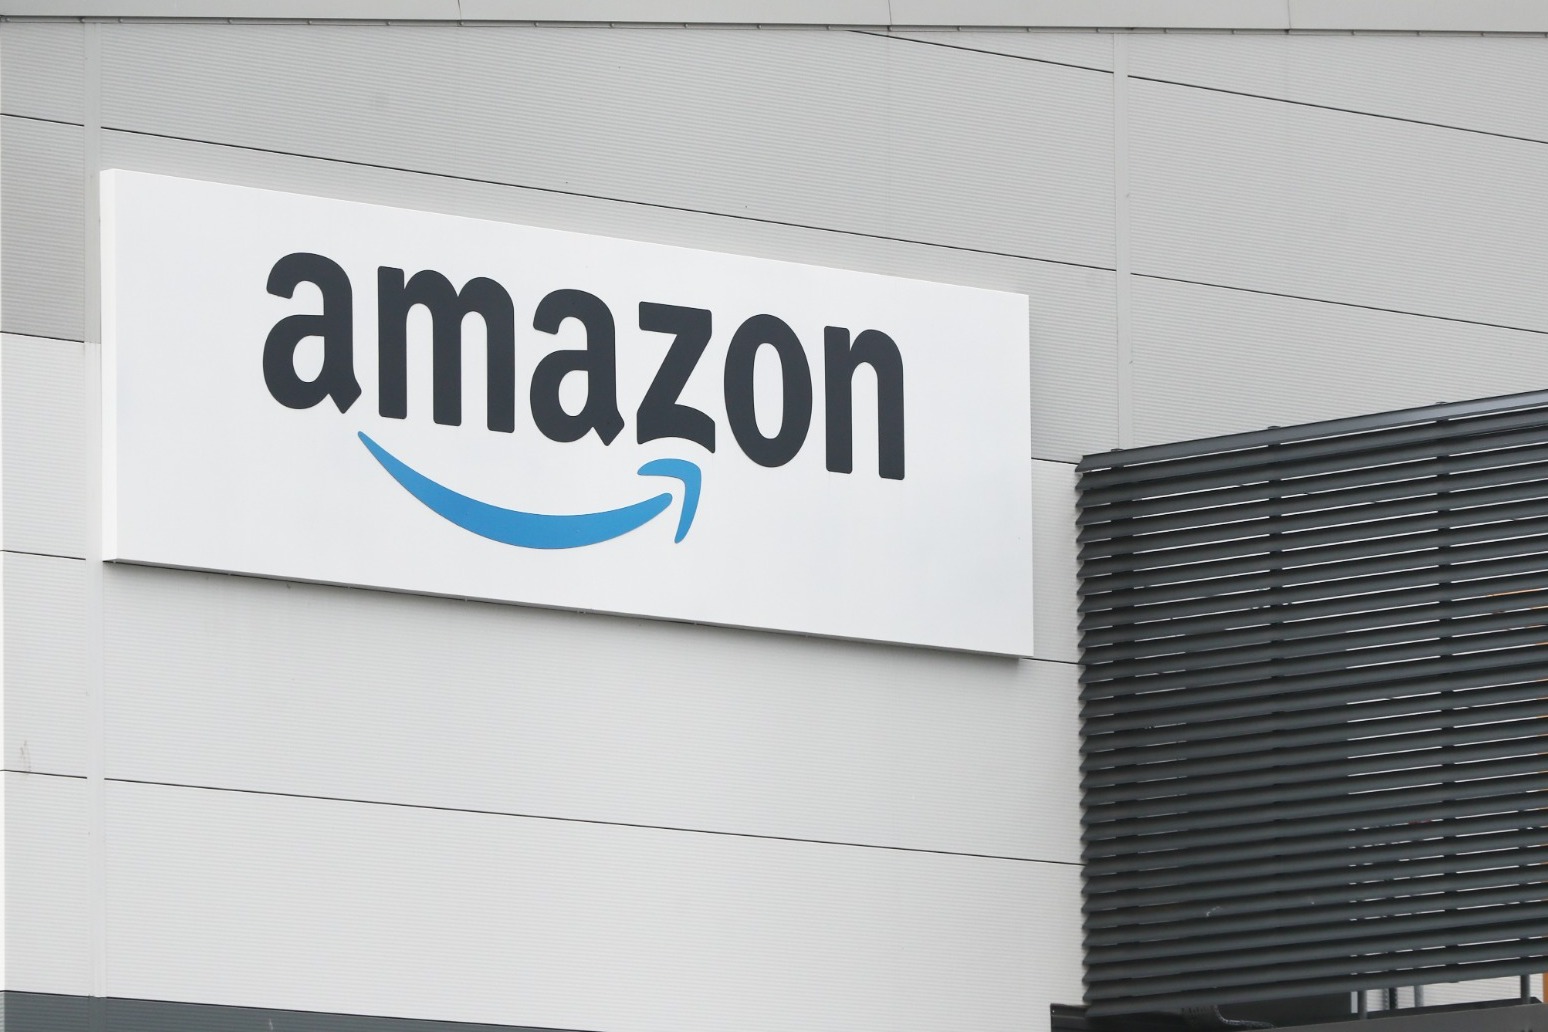 Amazon frontline workers to get special payment of up to £500 